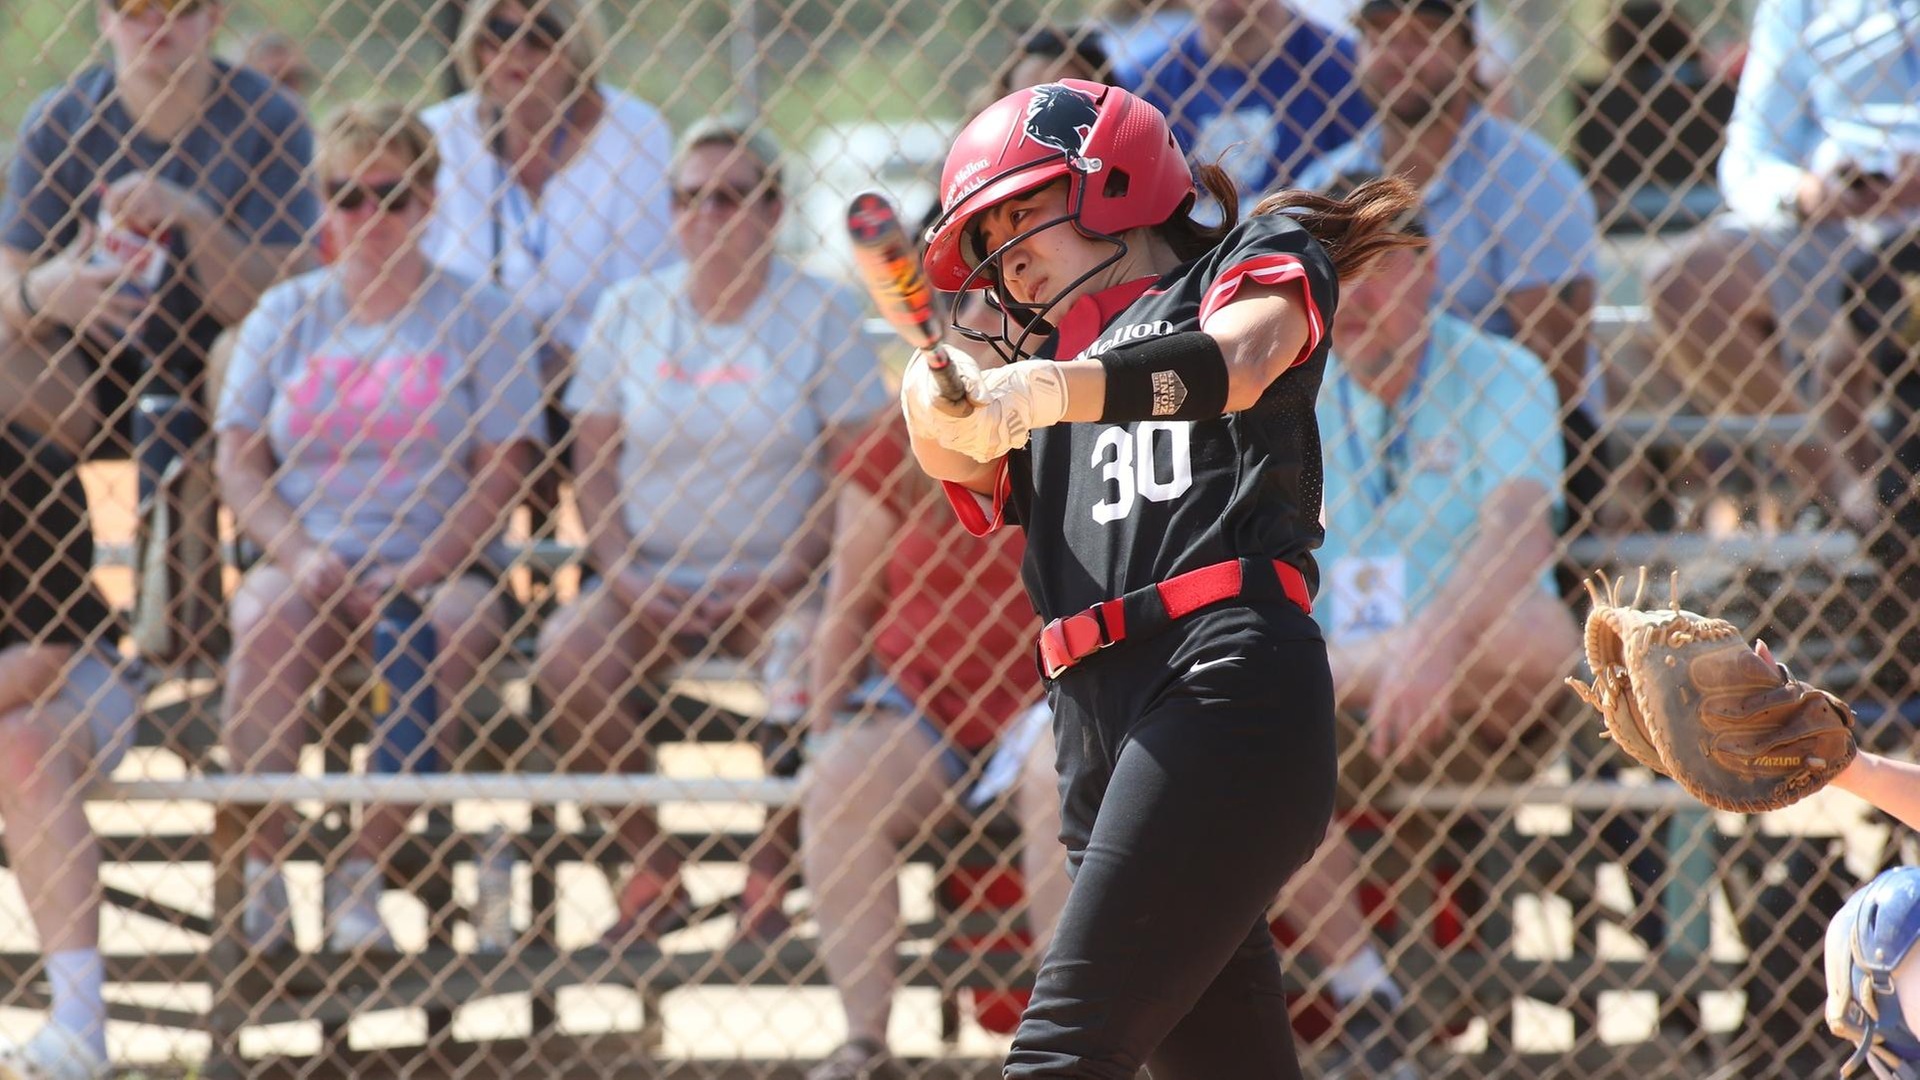 softball player wearing black and red uniform swings at the plate